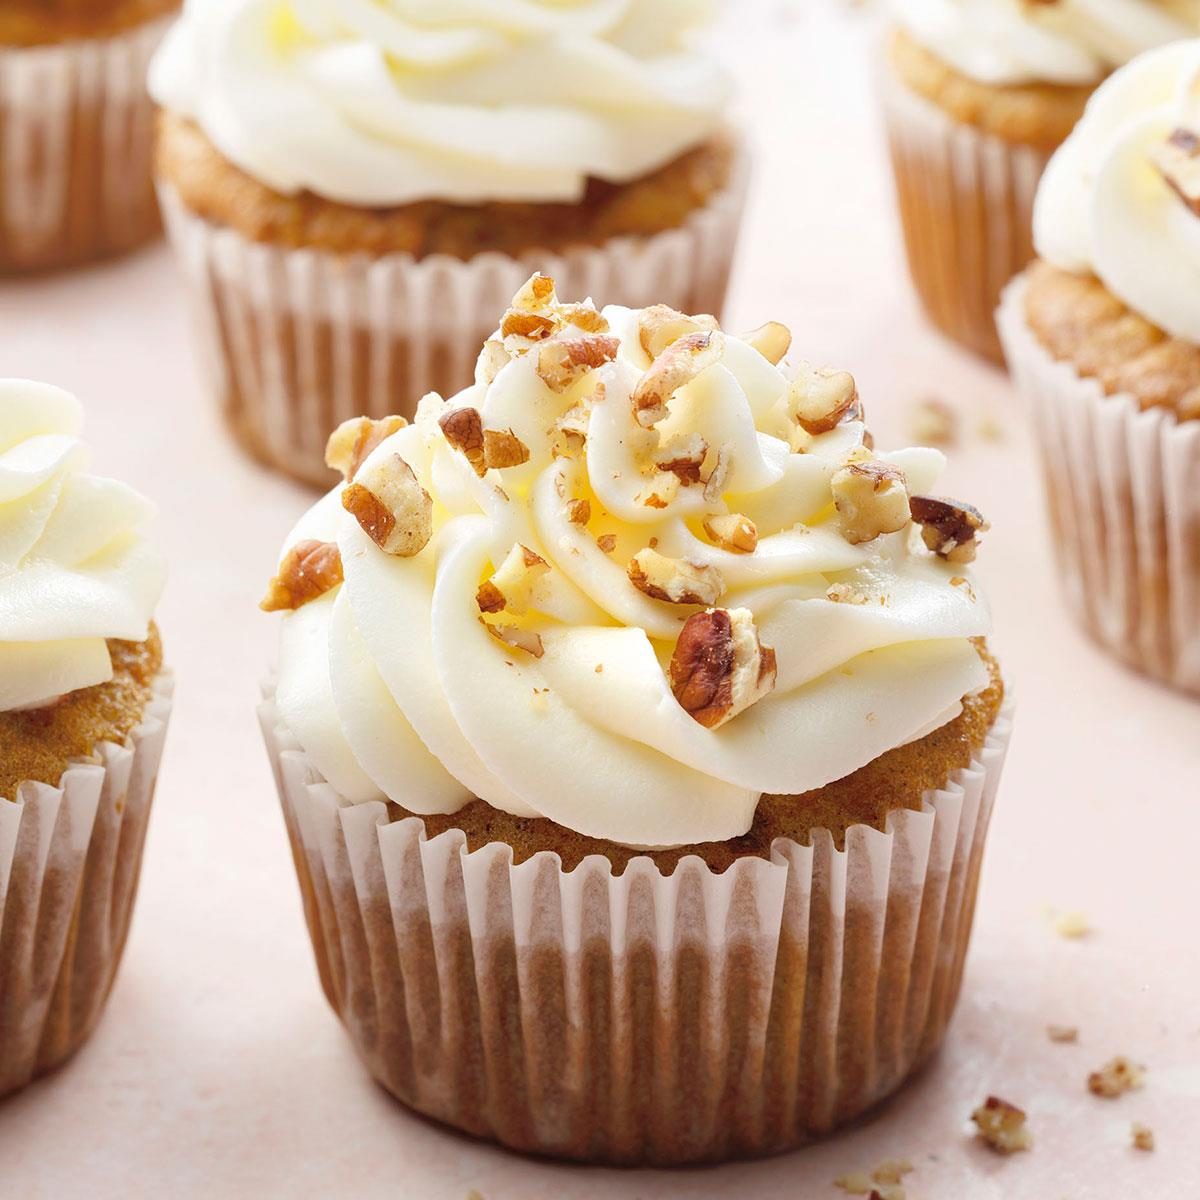 Gluten Free Carrot Cupcakes With Cream Cheese Frosting Exps Rc23 273371 Dr 08 22 2b